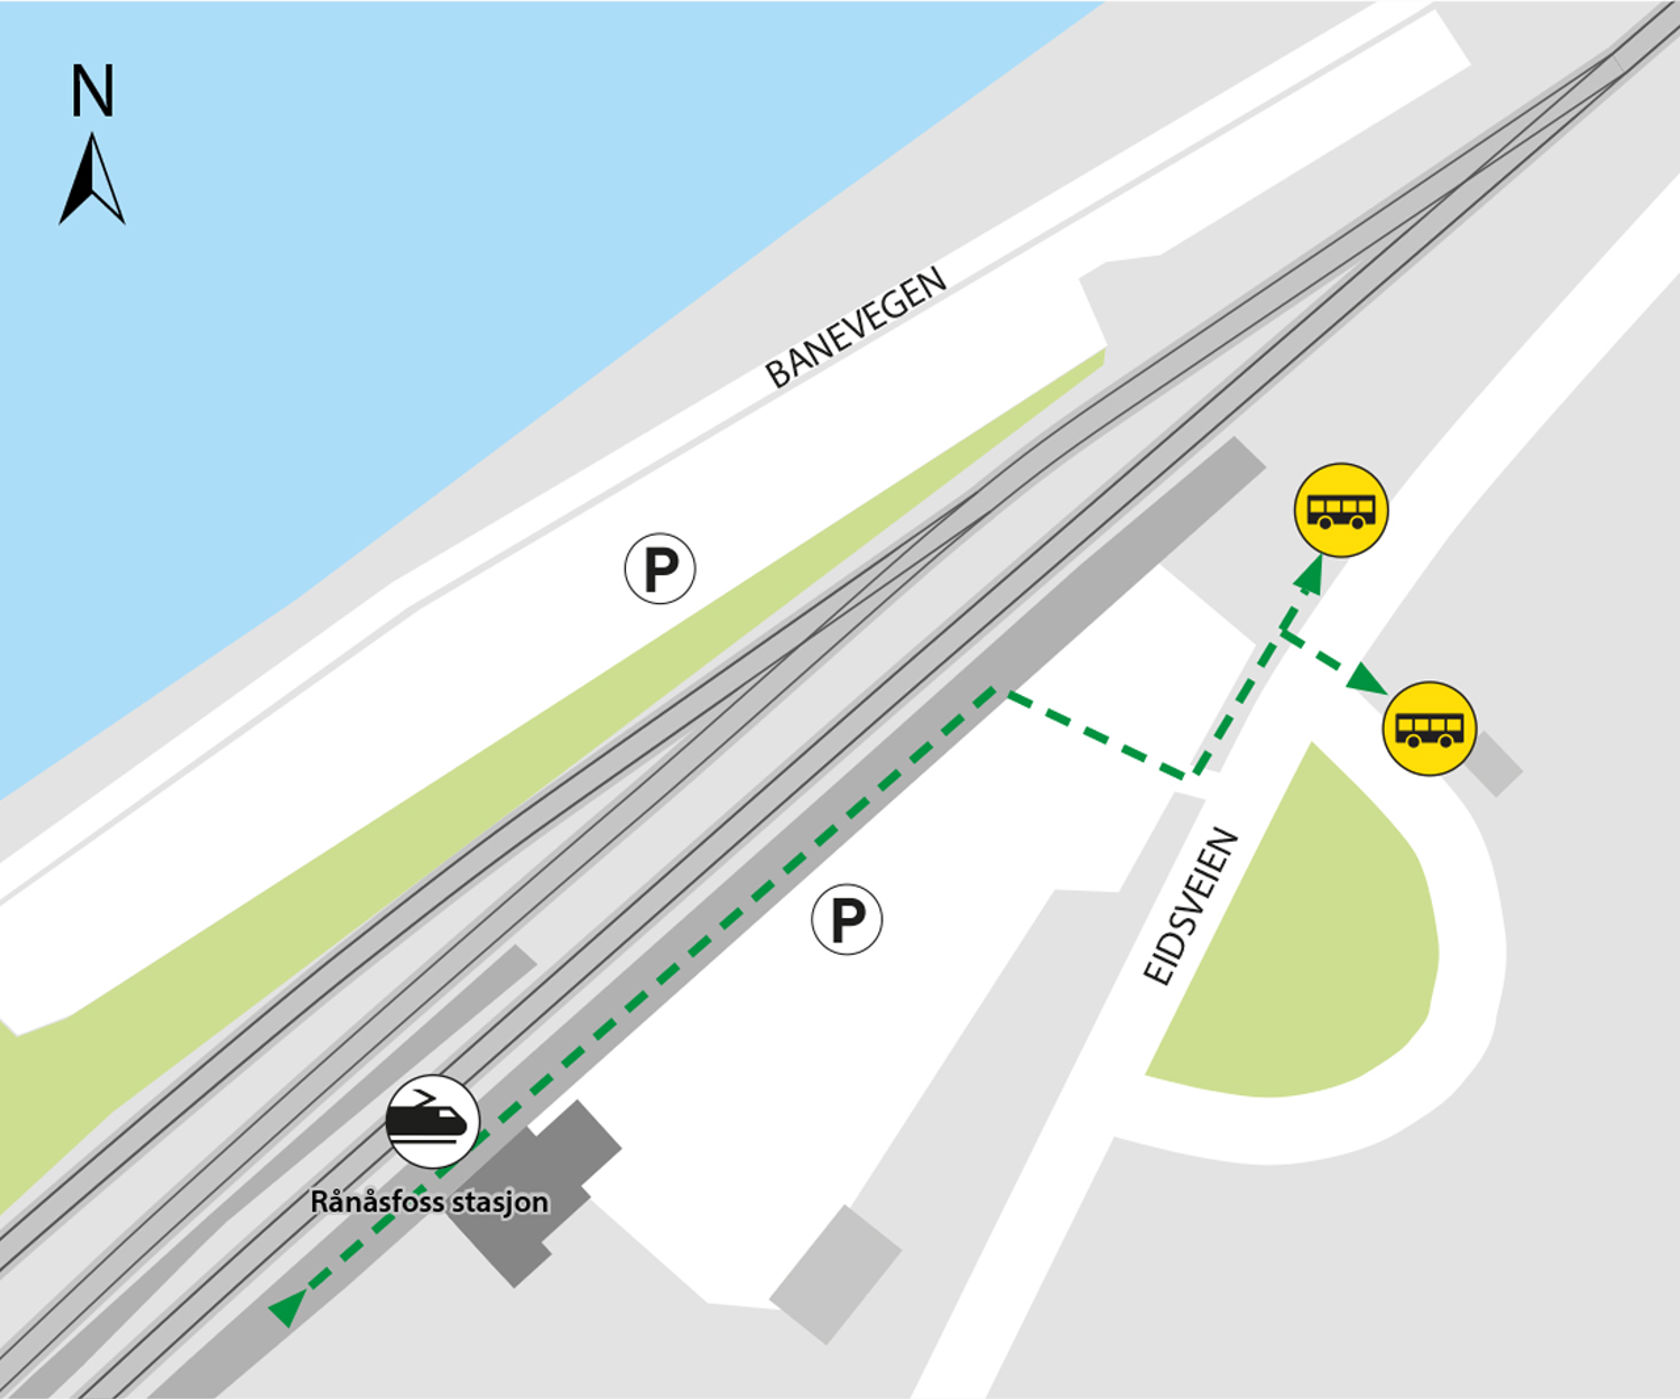 Map shows rail replacement service departs from Rånåsfoss station bus stops.